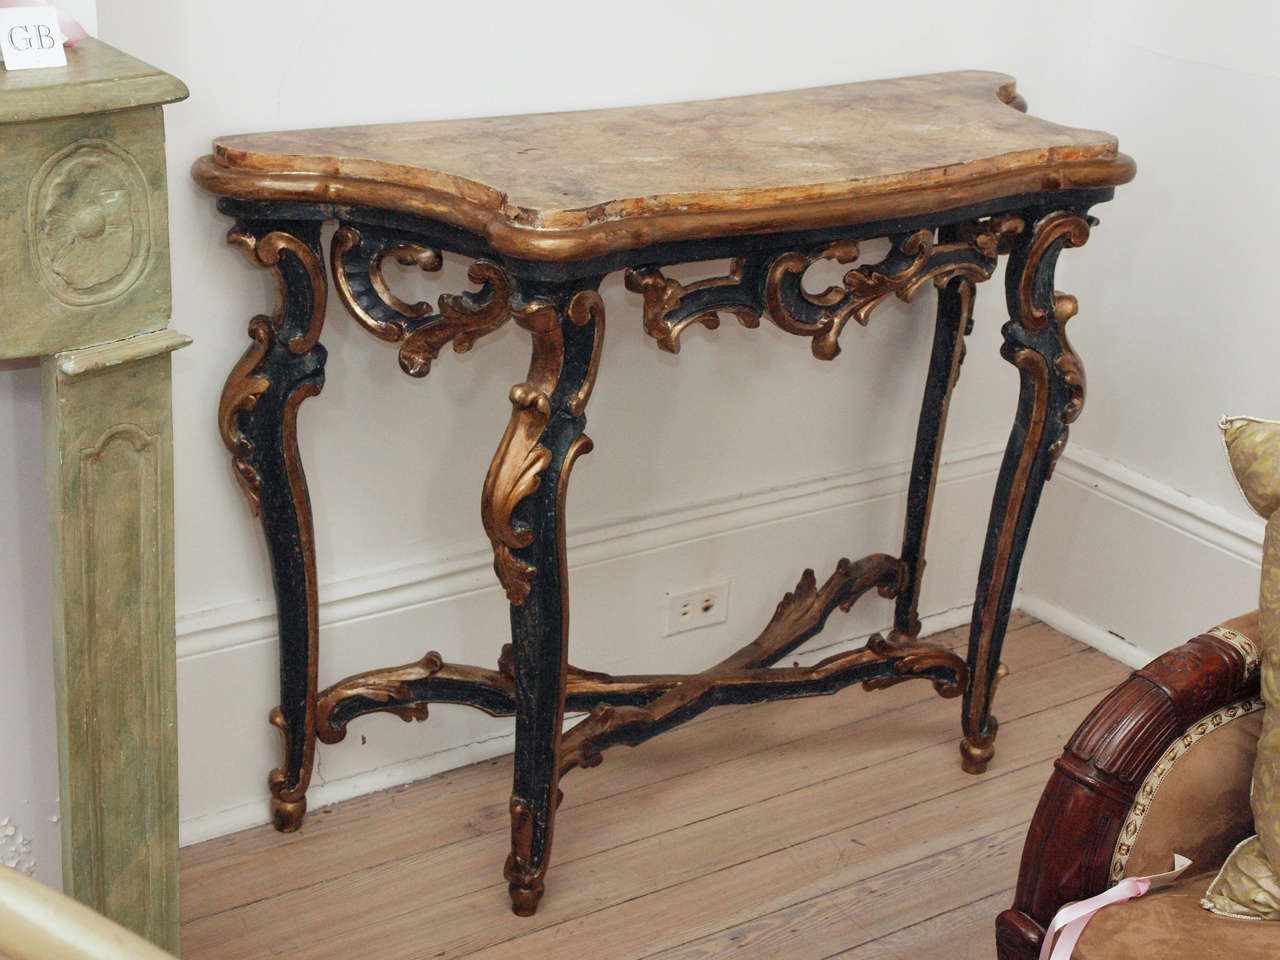 Pair of I8thc. Painted Italian Consoles.  Painted wooden consoles in black with elegant gold carvings on trestle, legs and apron. The top is also wood with gold faux marbre finish and complemented by gold base with rounded edge..